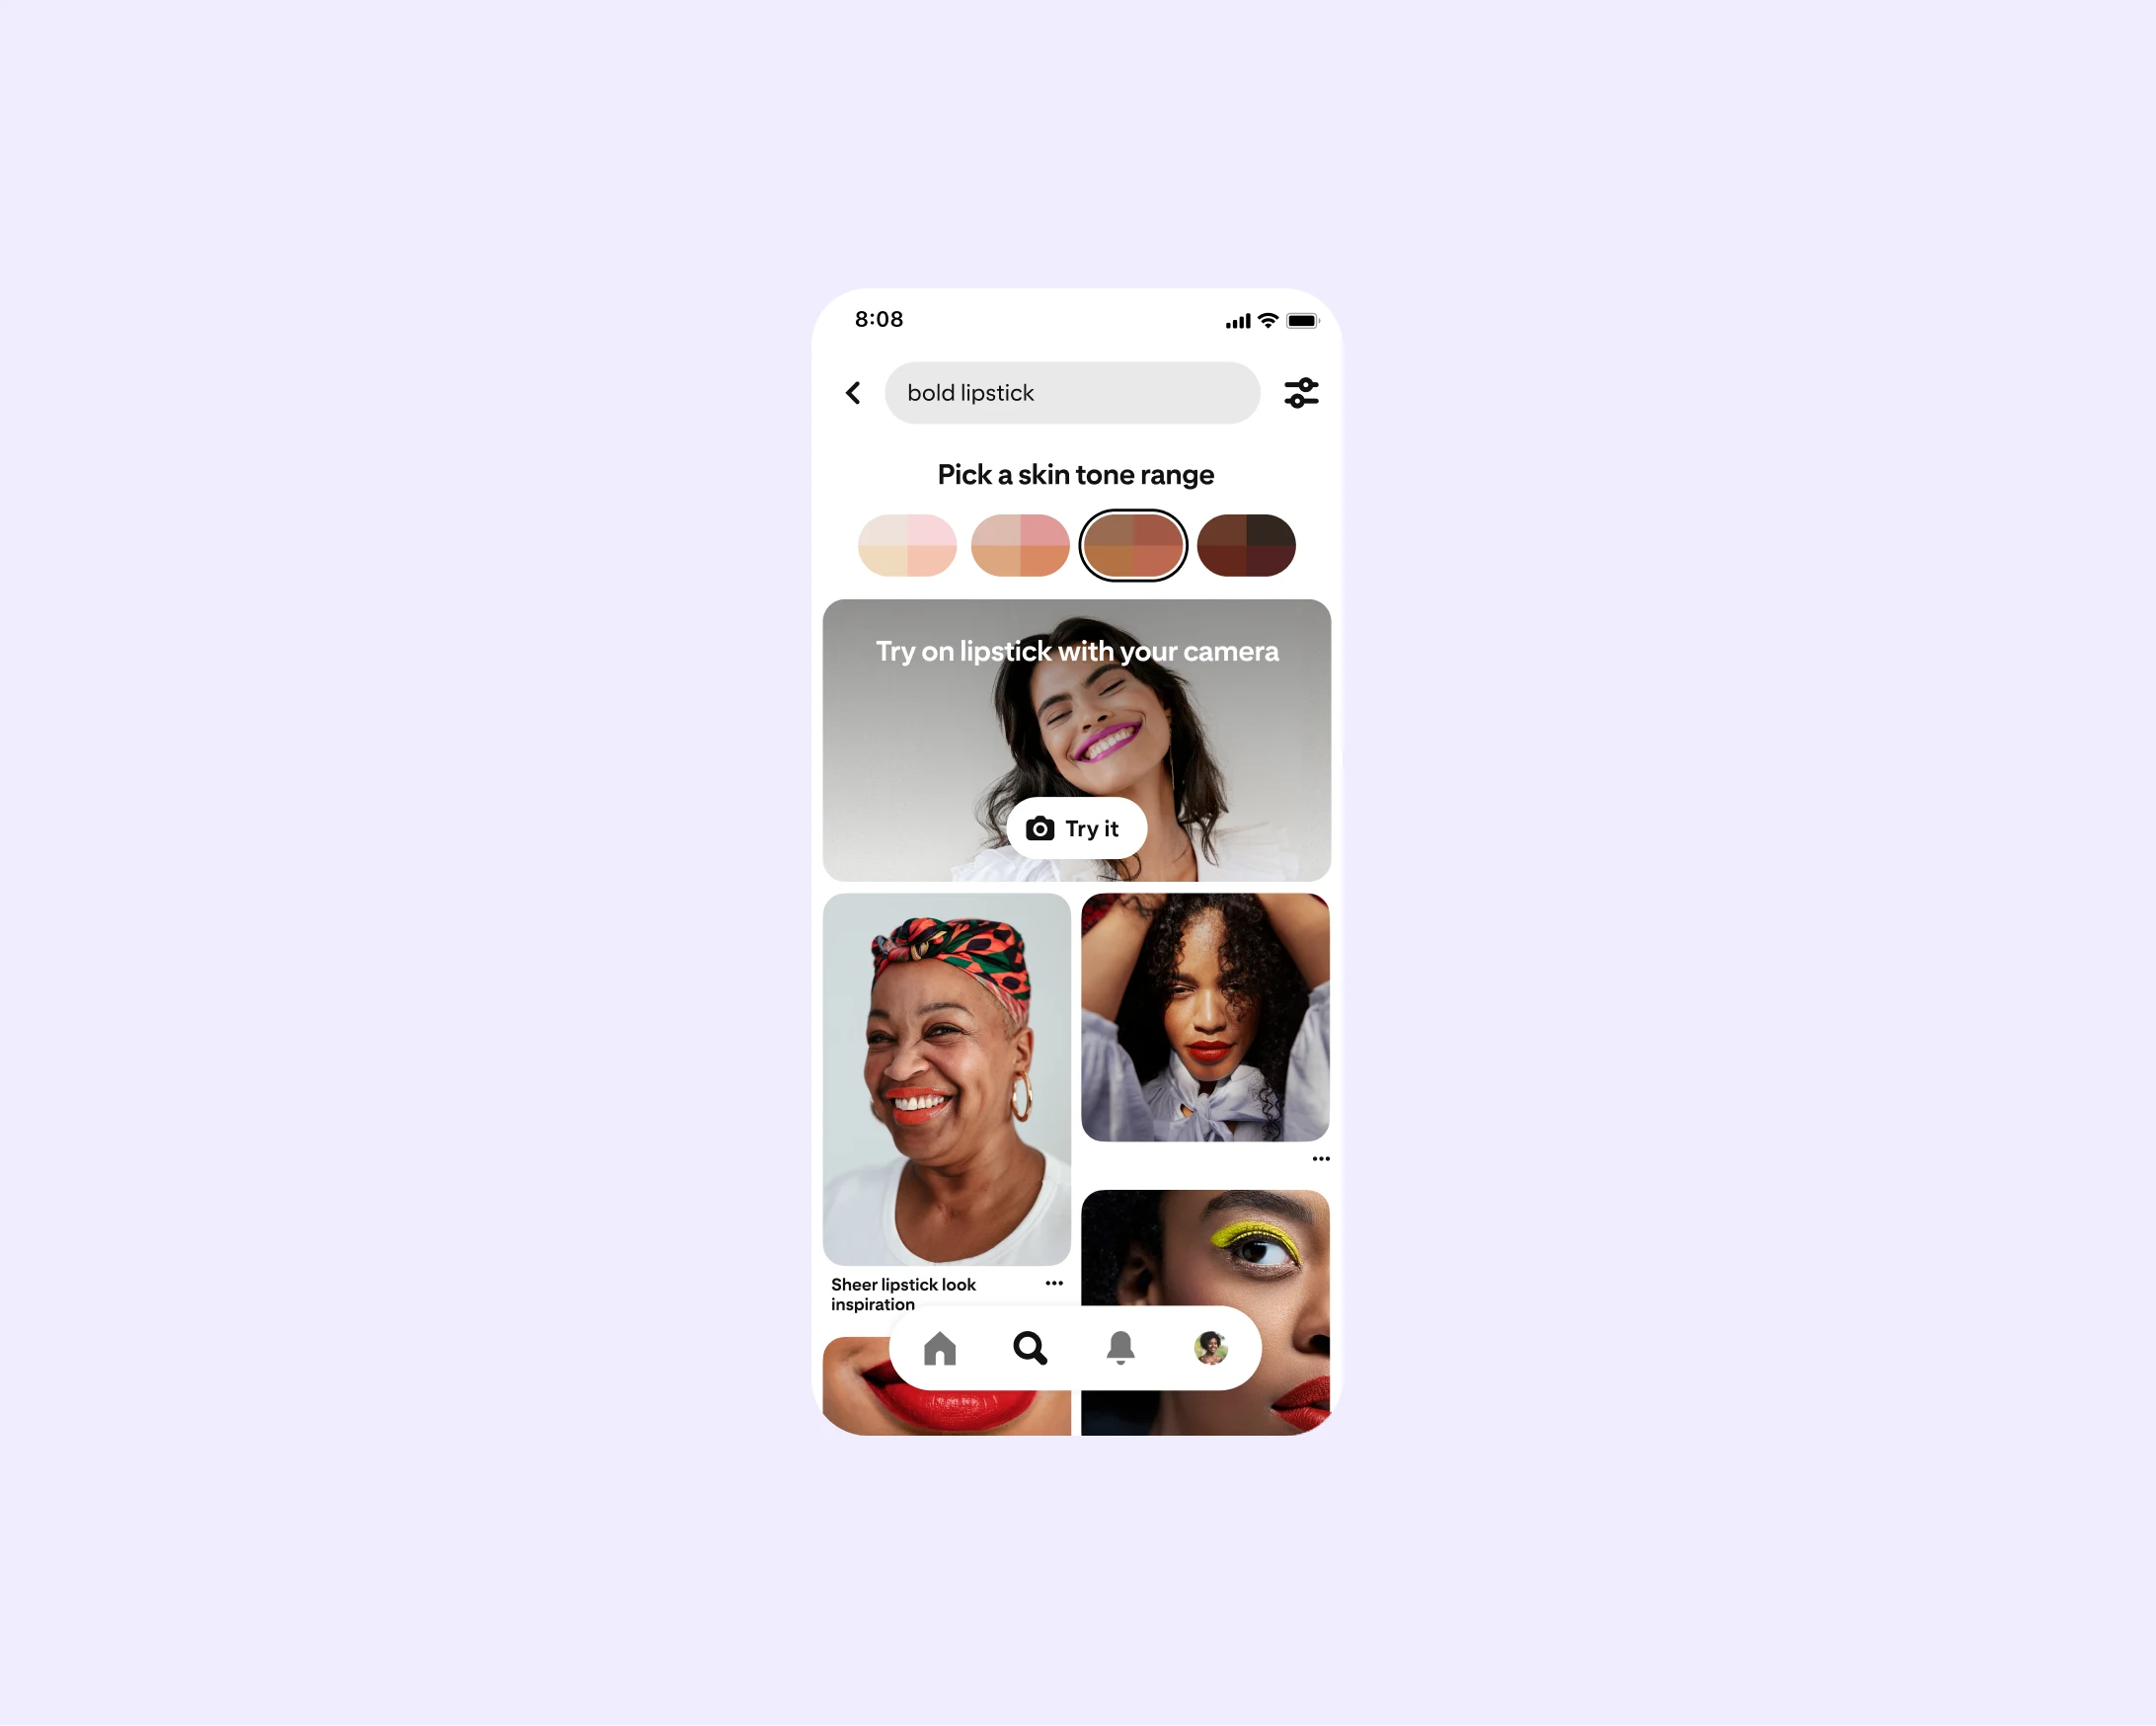 A phone screen shows Pinterest search results, which allow you to select a skin tone range for results.